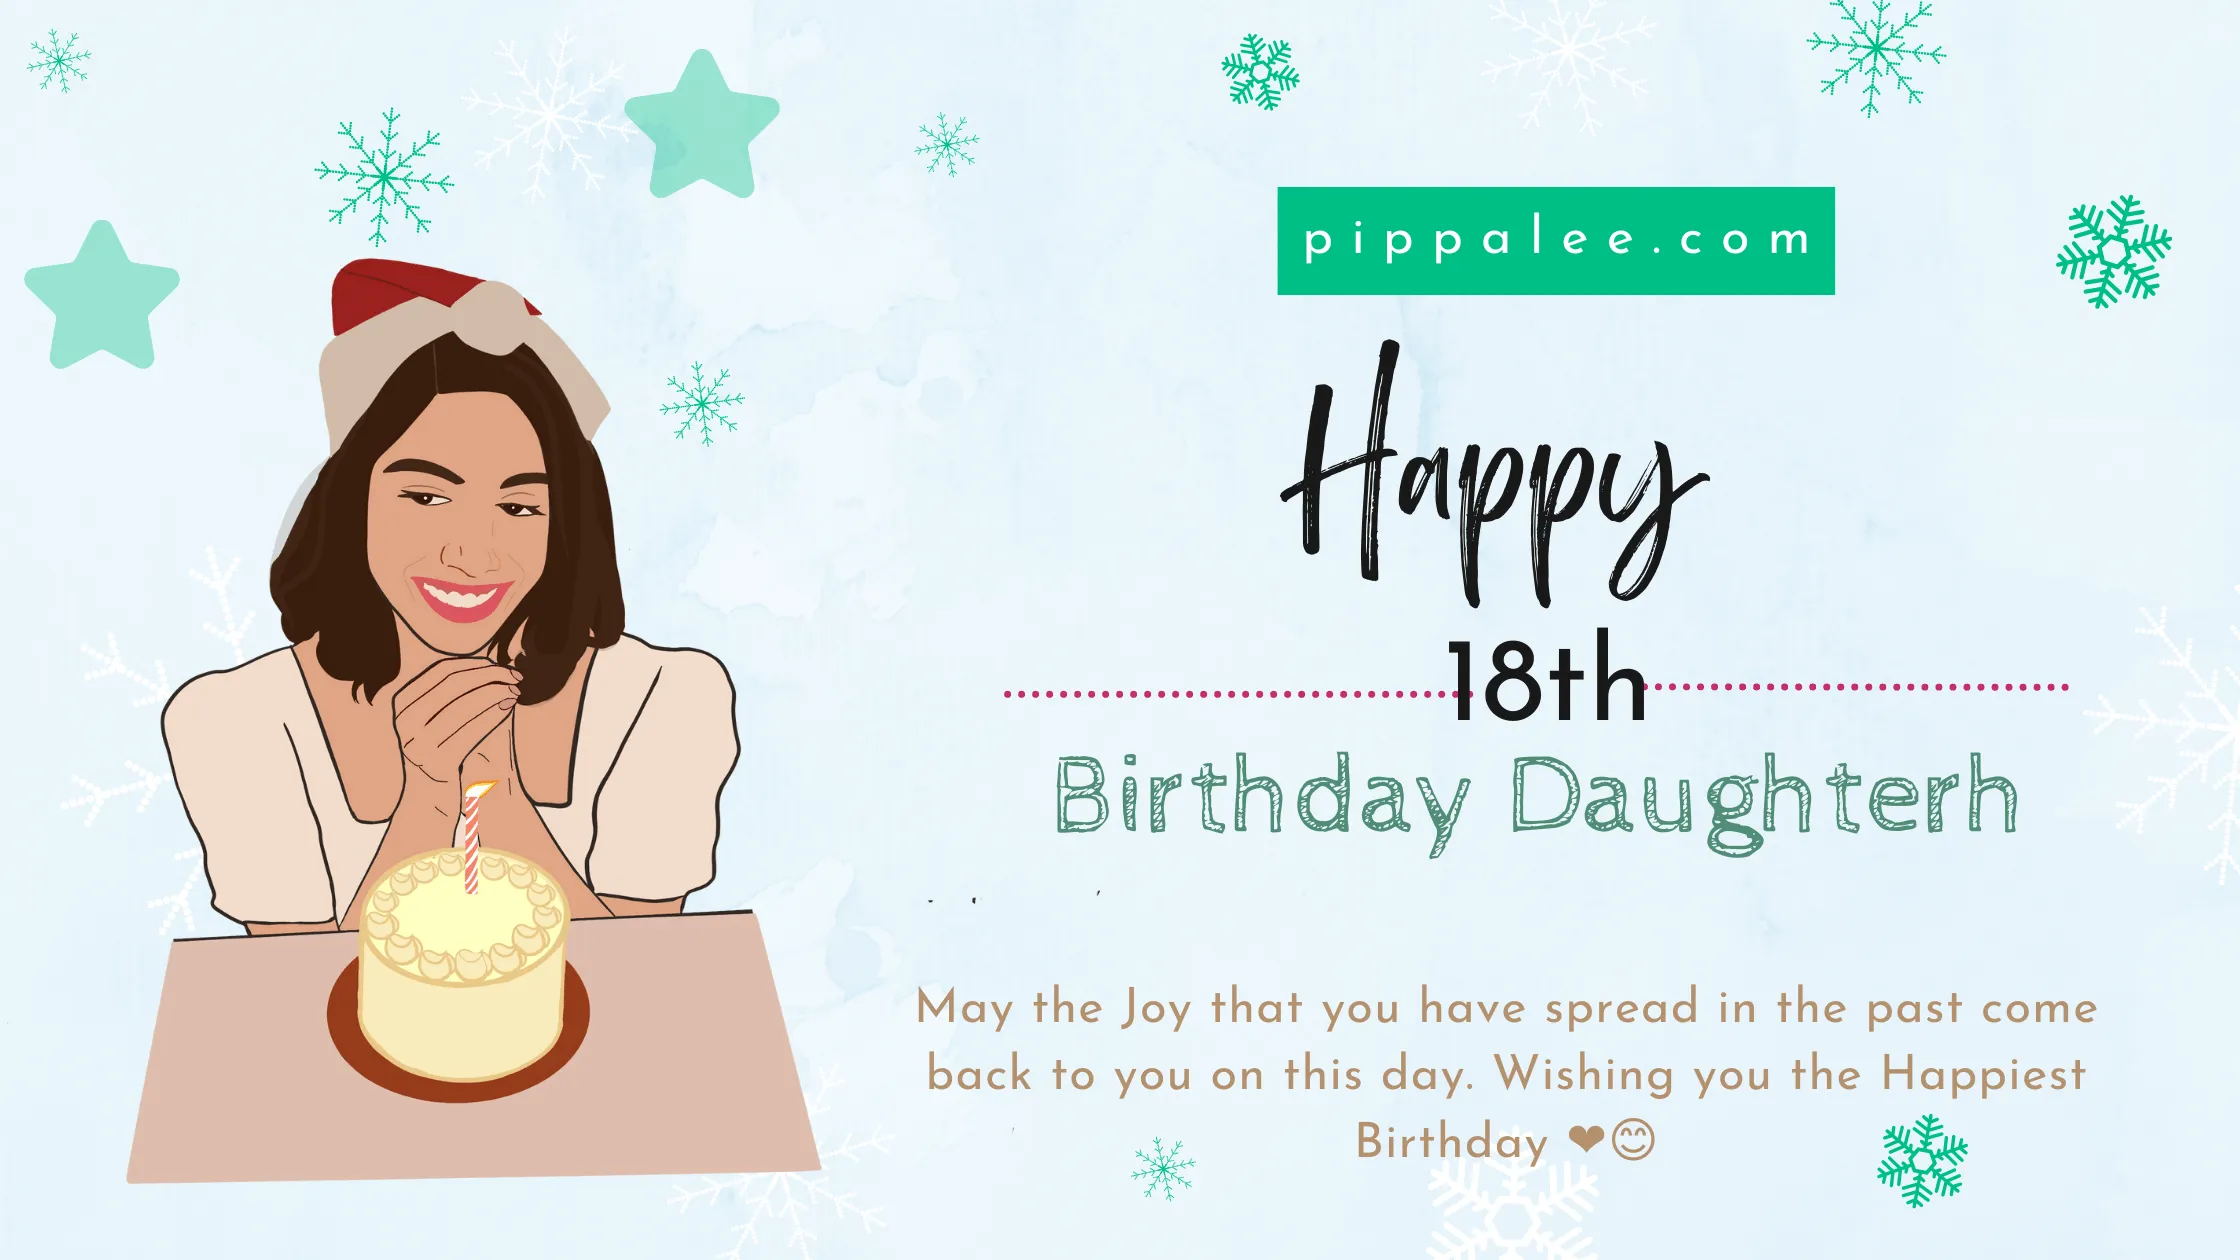 Happy 18th Birthday Daughter - Wishes & Messages